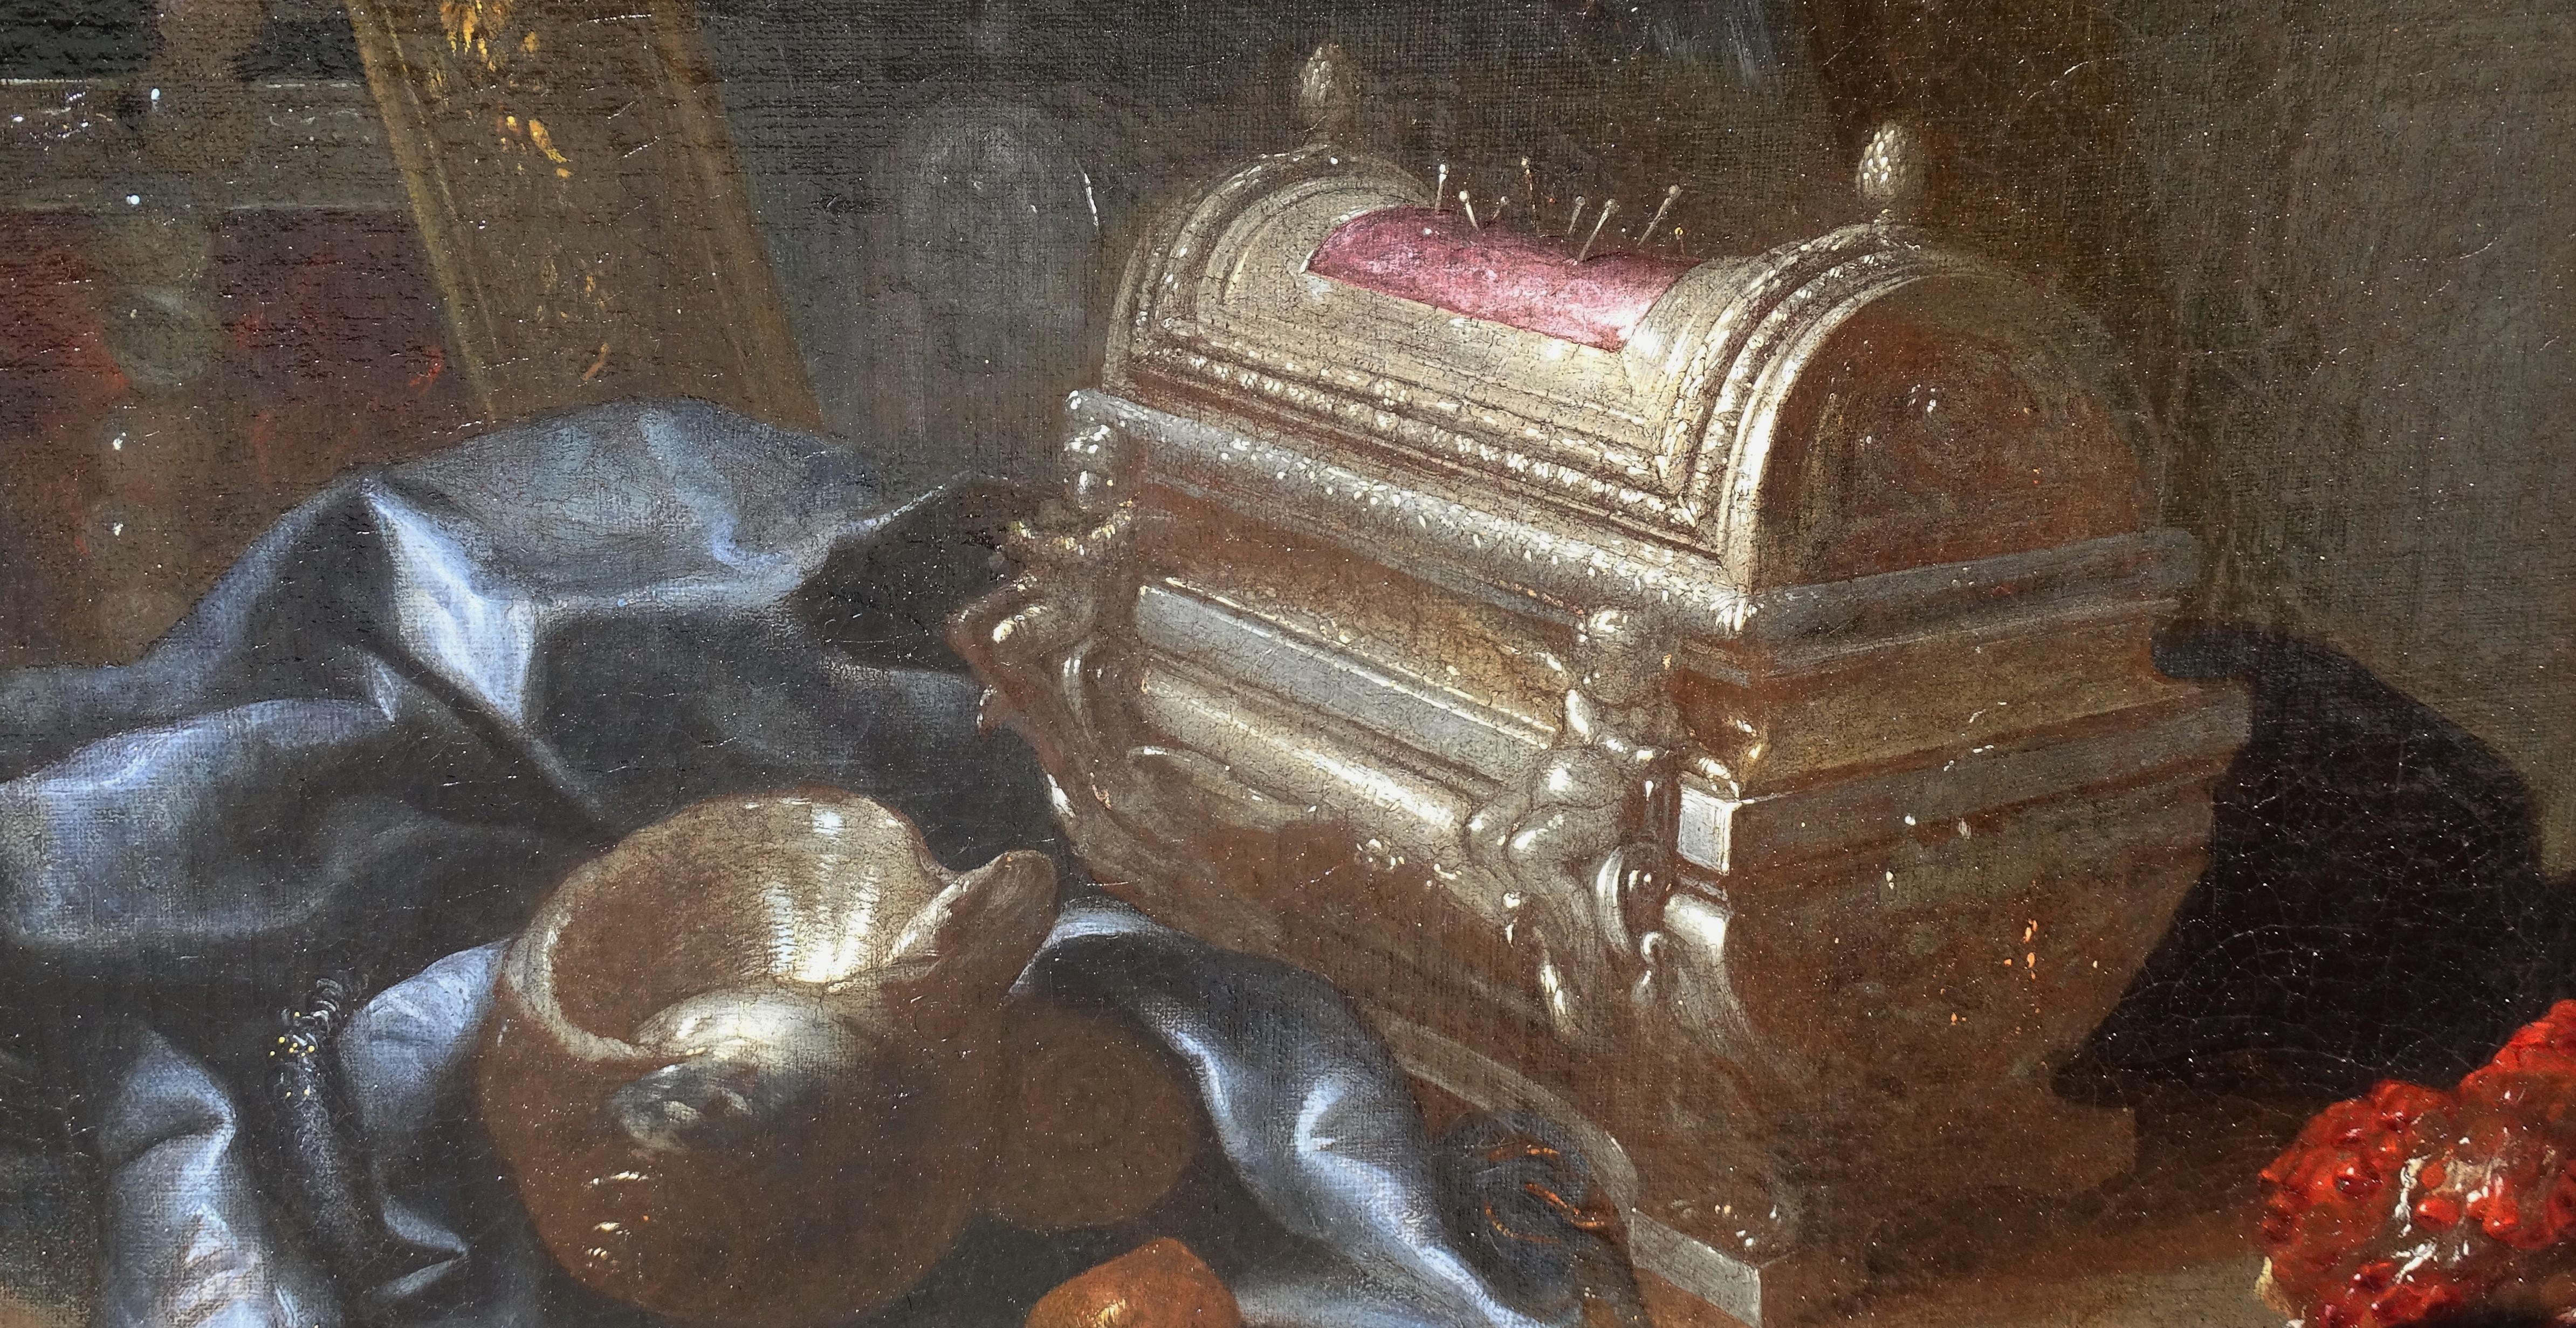 Baroque Still Life Meiffren Comte 17th Century Oil Painting on Canvas

Baroque Still Life with pin box, frame, shell, blue tapis and pomegranate, attributed to Meiffren Comte (Marseille, 1630 - Marseille, 1705).

This work inspired by the Nordic